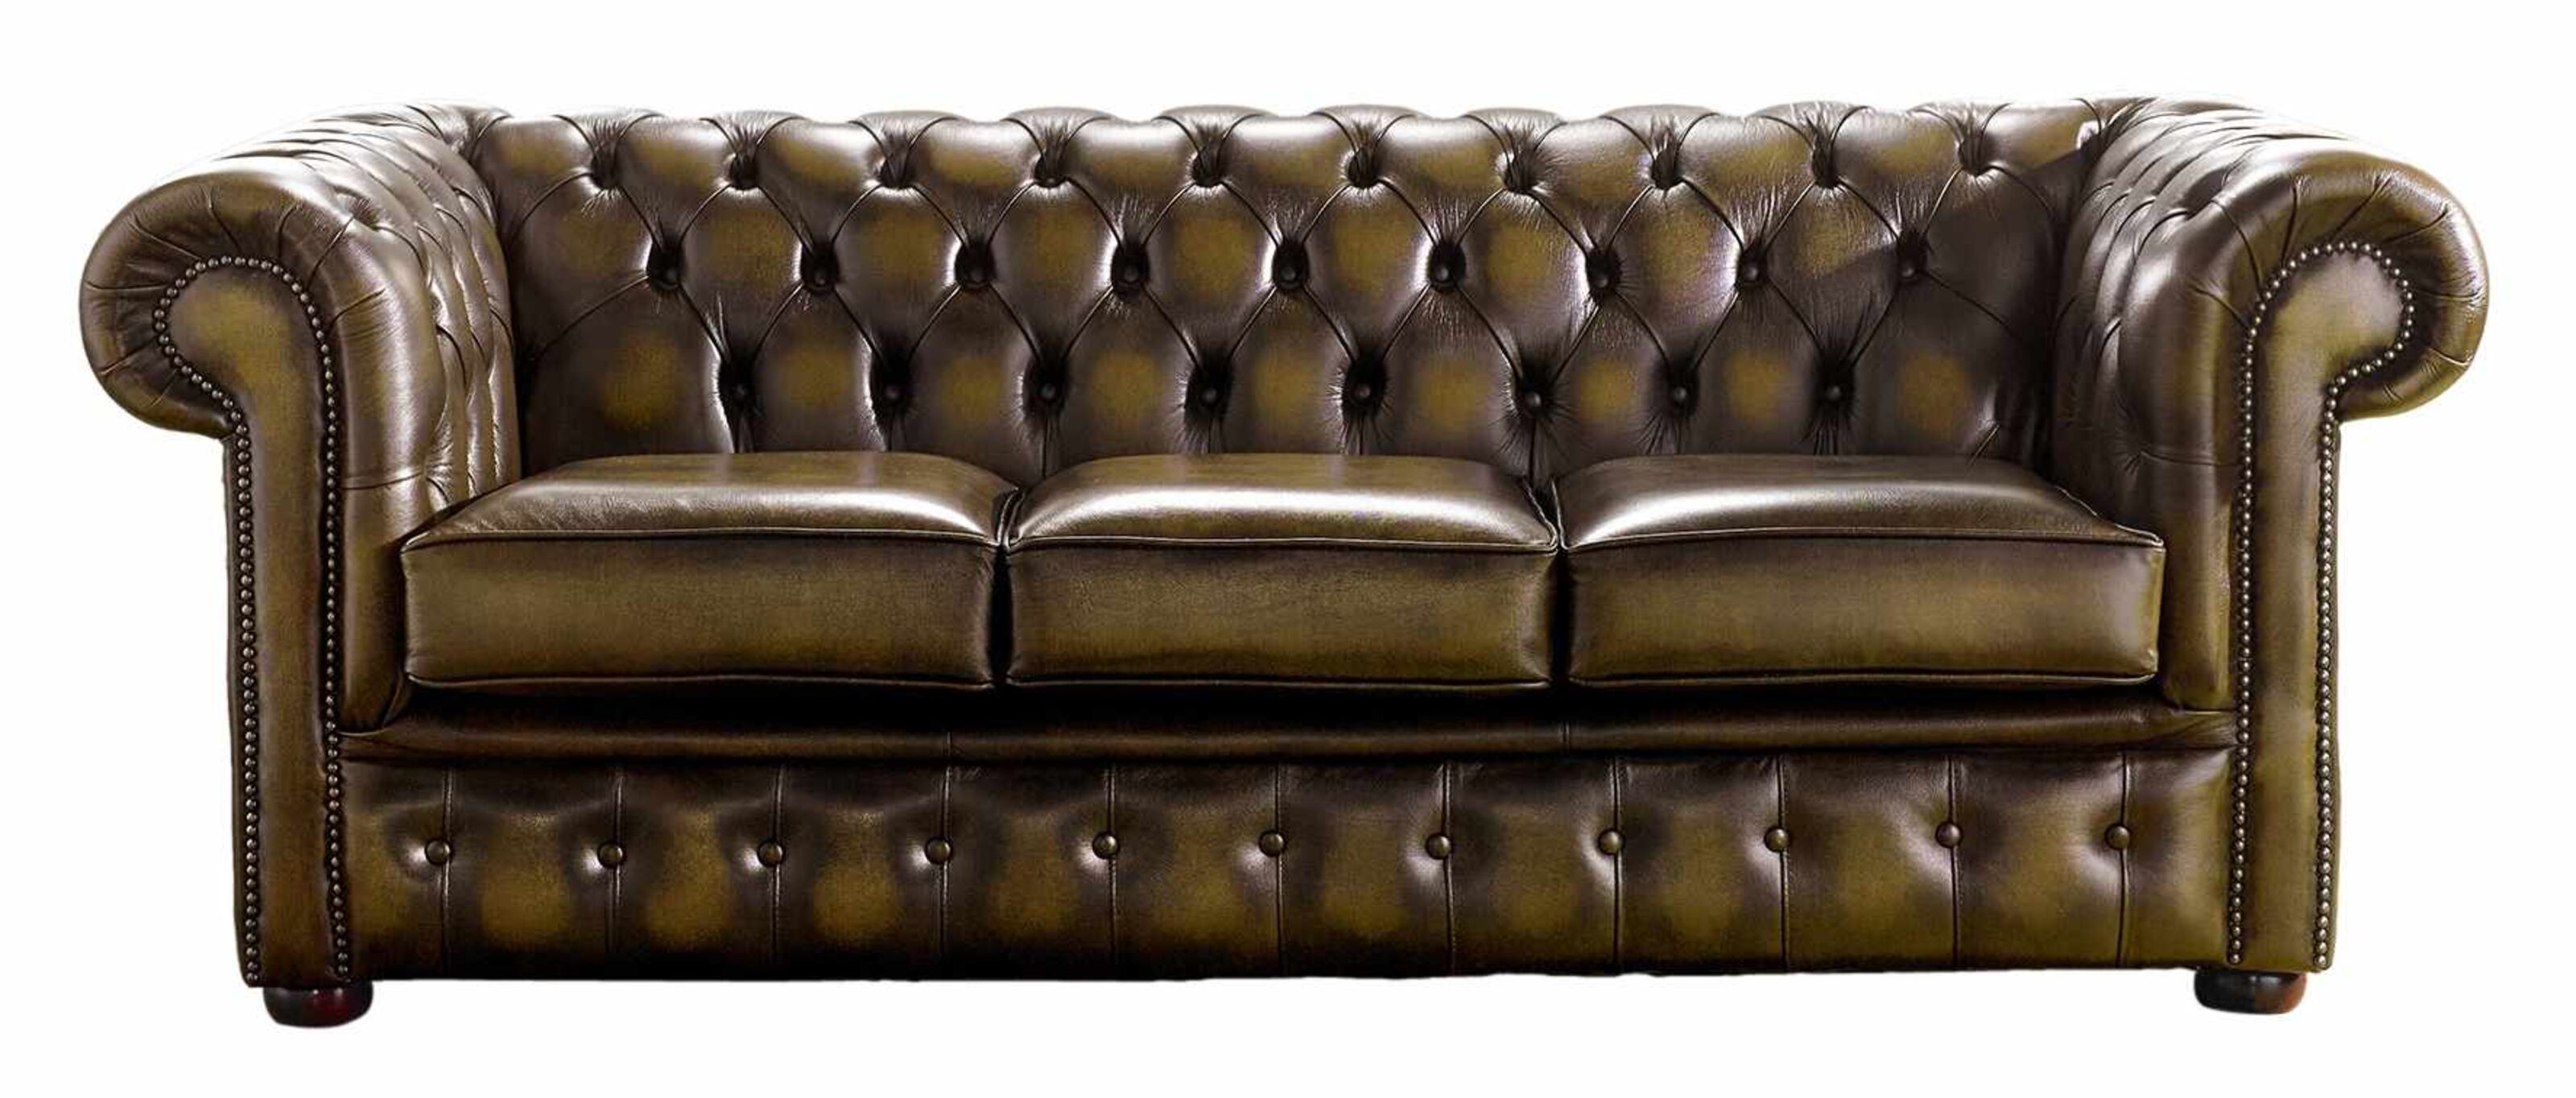 Discovering Chesterfield Sofas for Sale in the UK Timeless Elegance at Your Doorstep  %Post Title